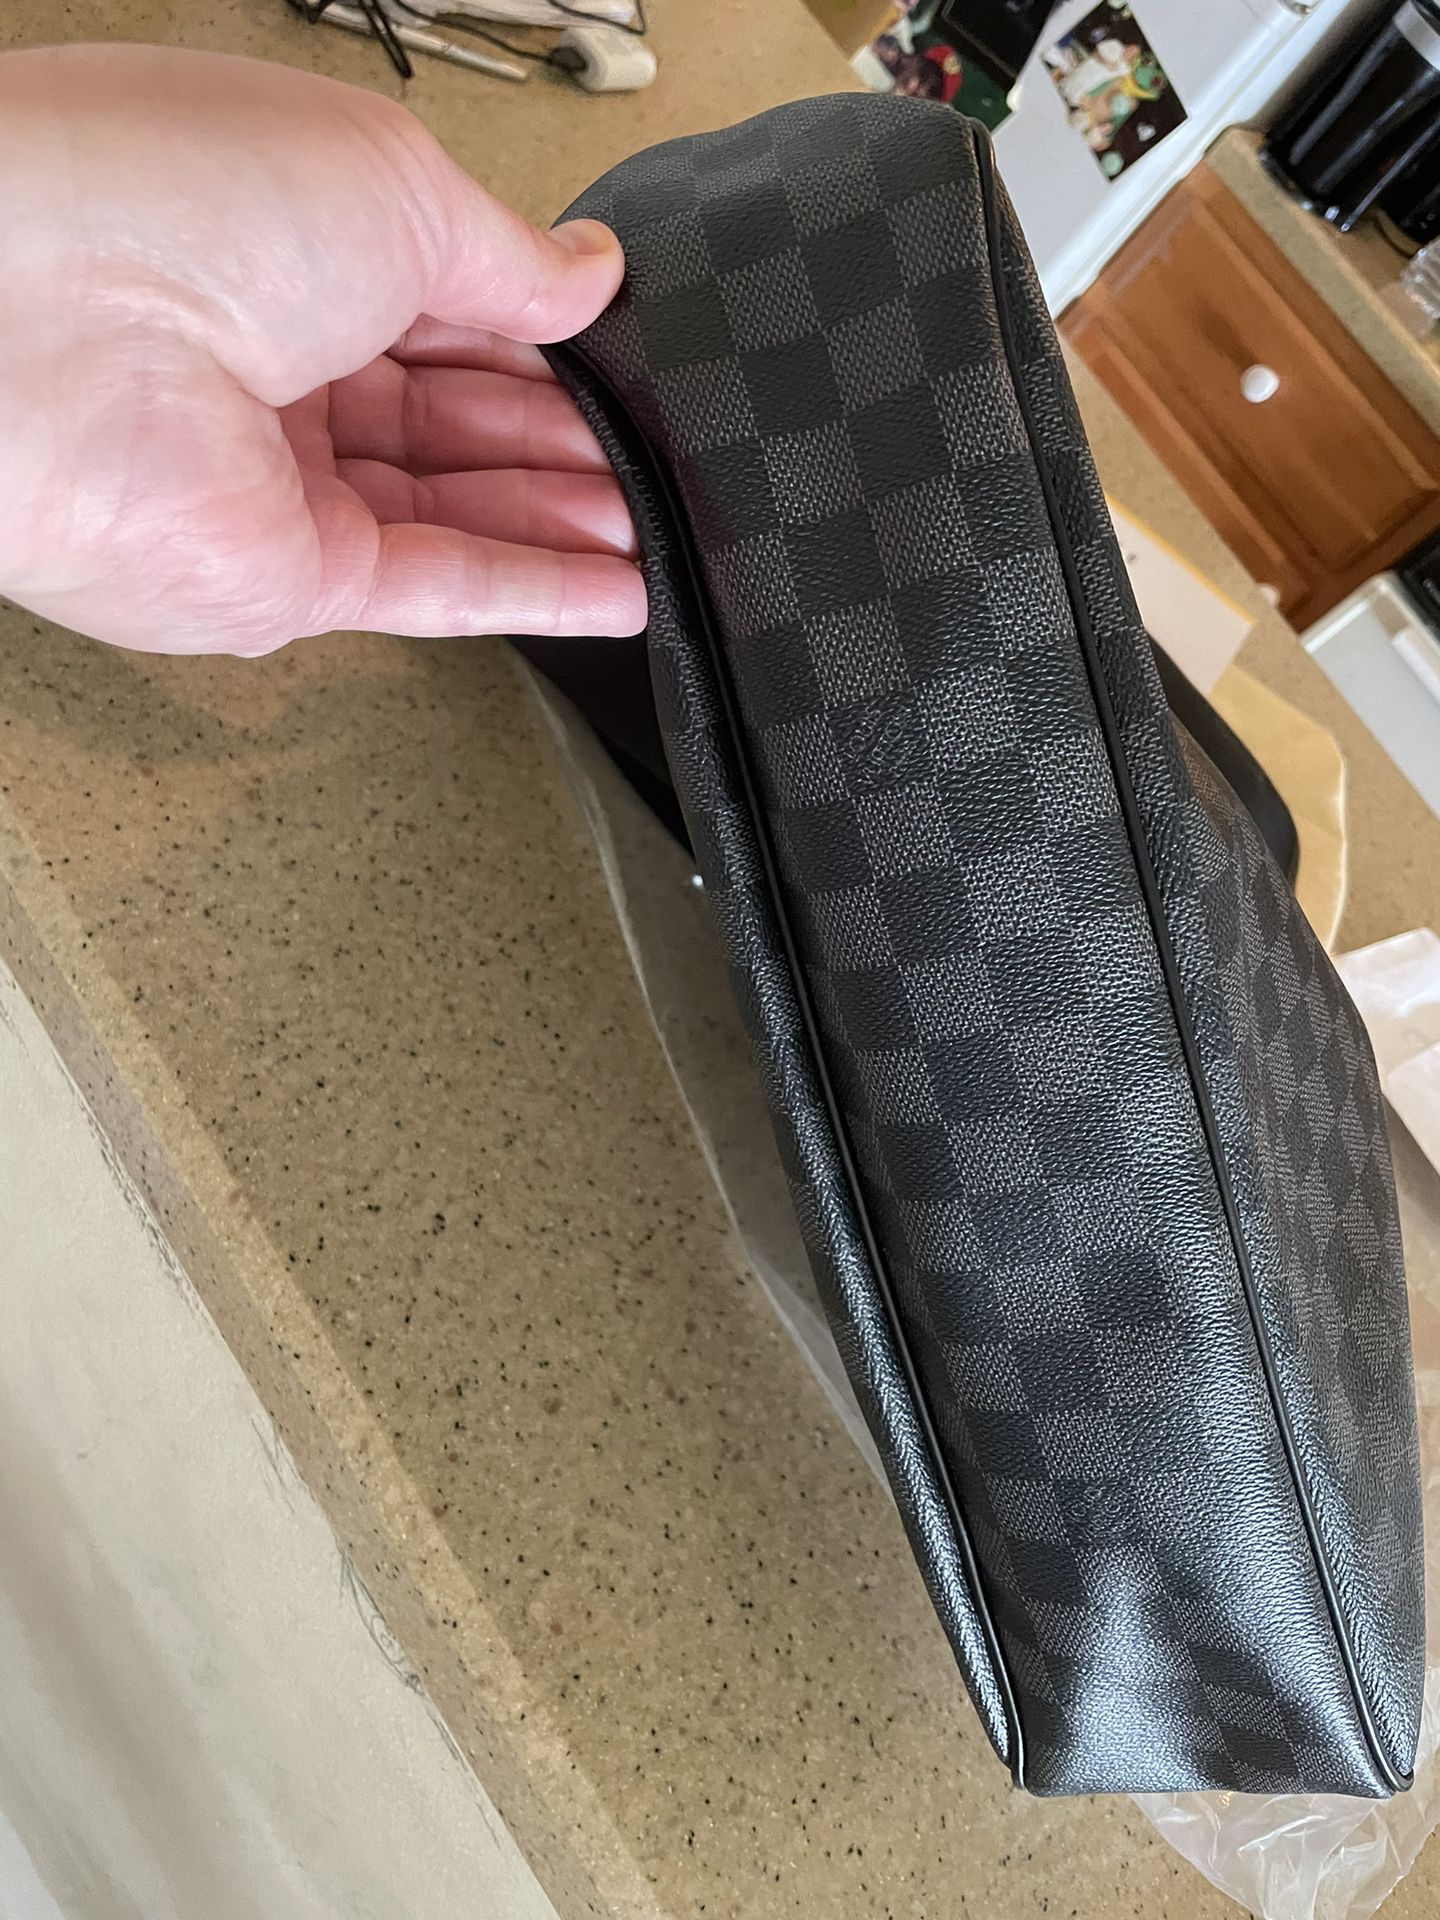 Louis Vuitton Trio messenger bag for Sale in Fulshear, TX - OfferUp